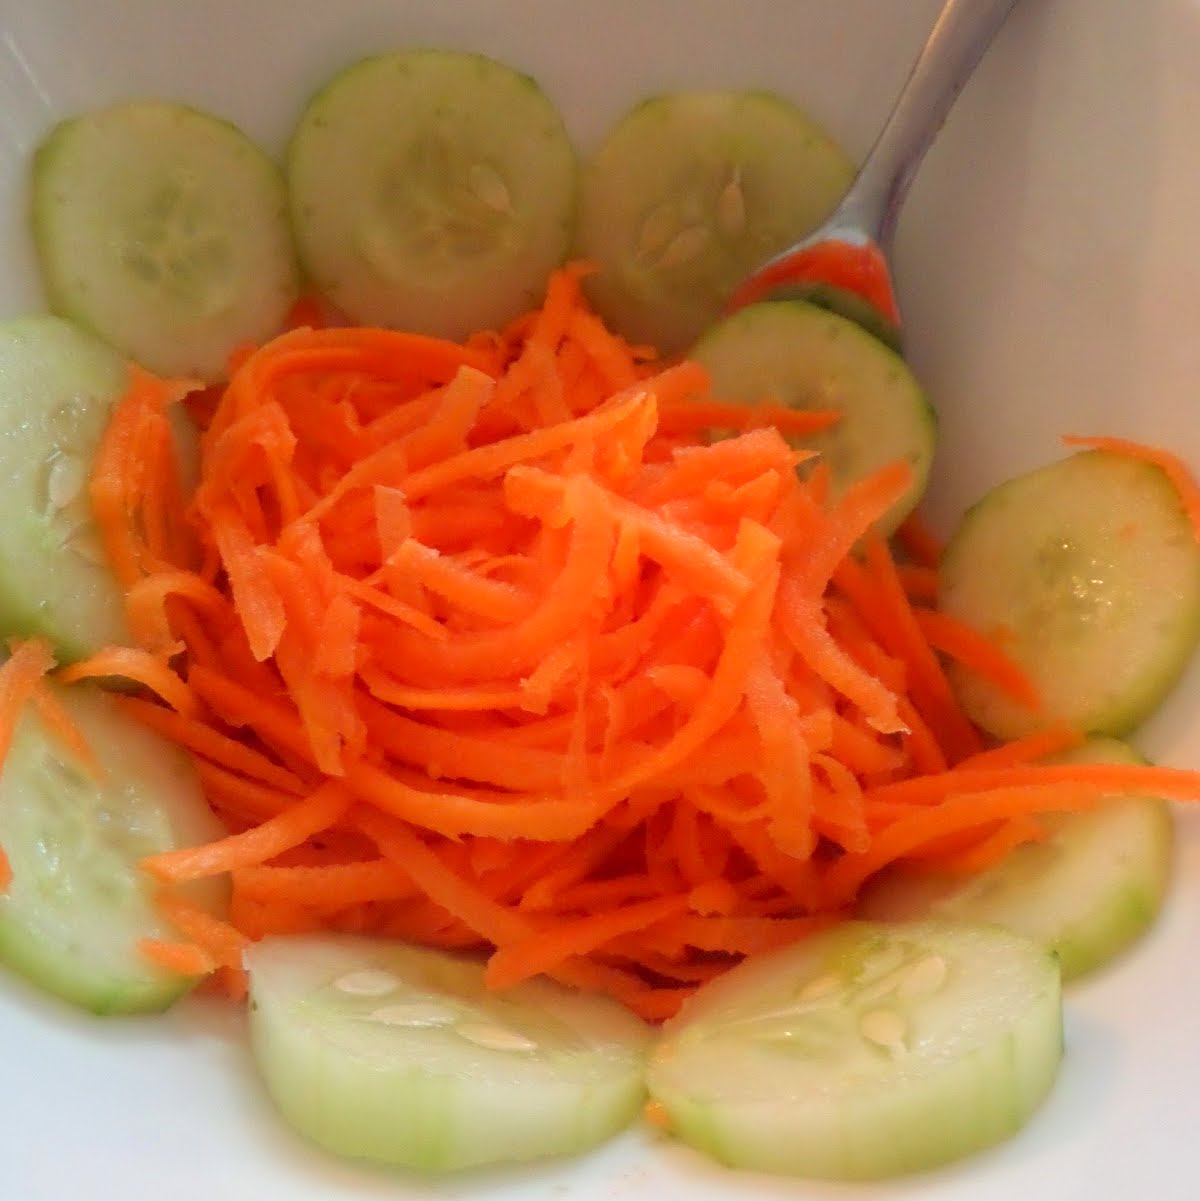 Simple Carrot and Cucumber Salad:  A 3 ingredient salad of carrots, cucumbers and lemon juice.  So simple yet so tasty.